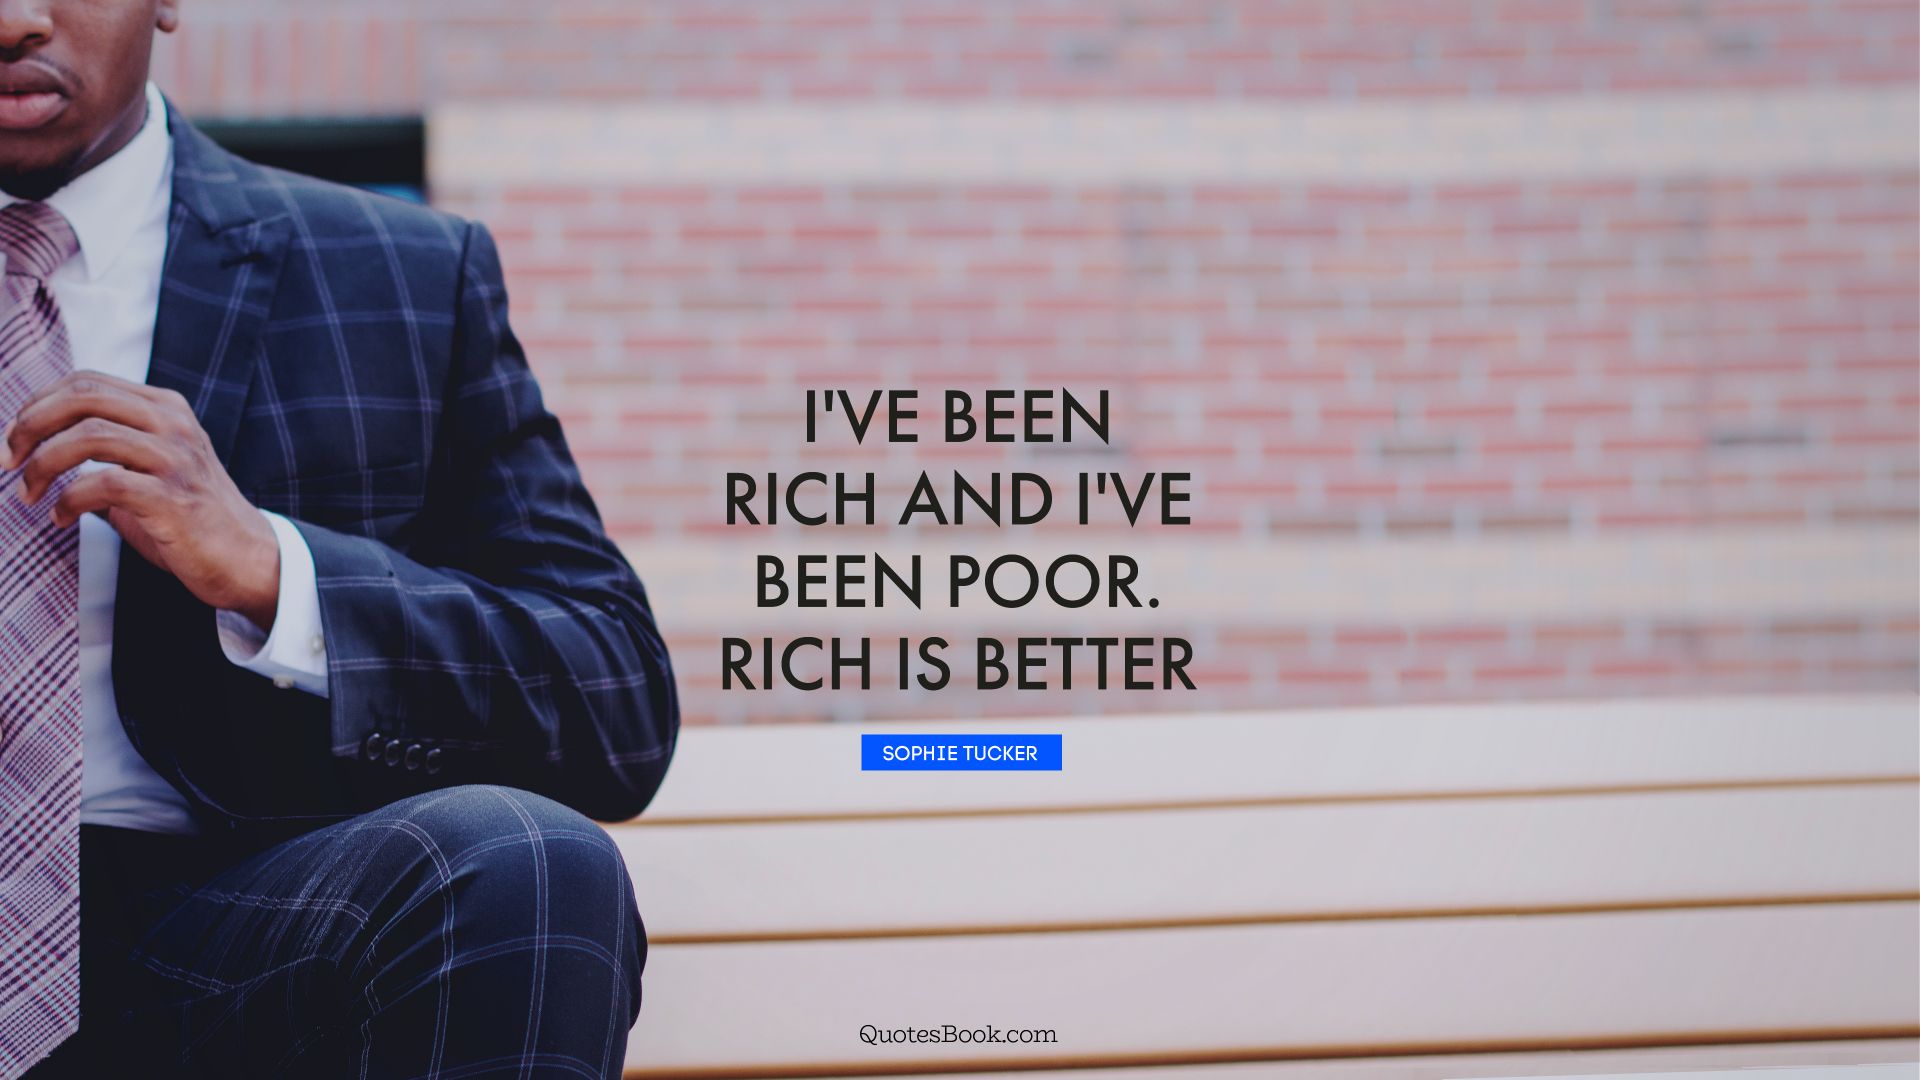 I've been rich and I've been poor. Rich is better. - Quote by Sophie Tucker